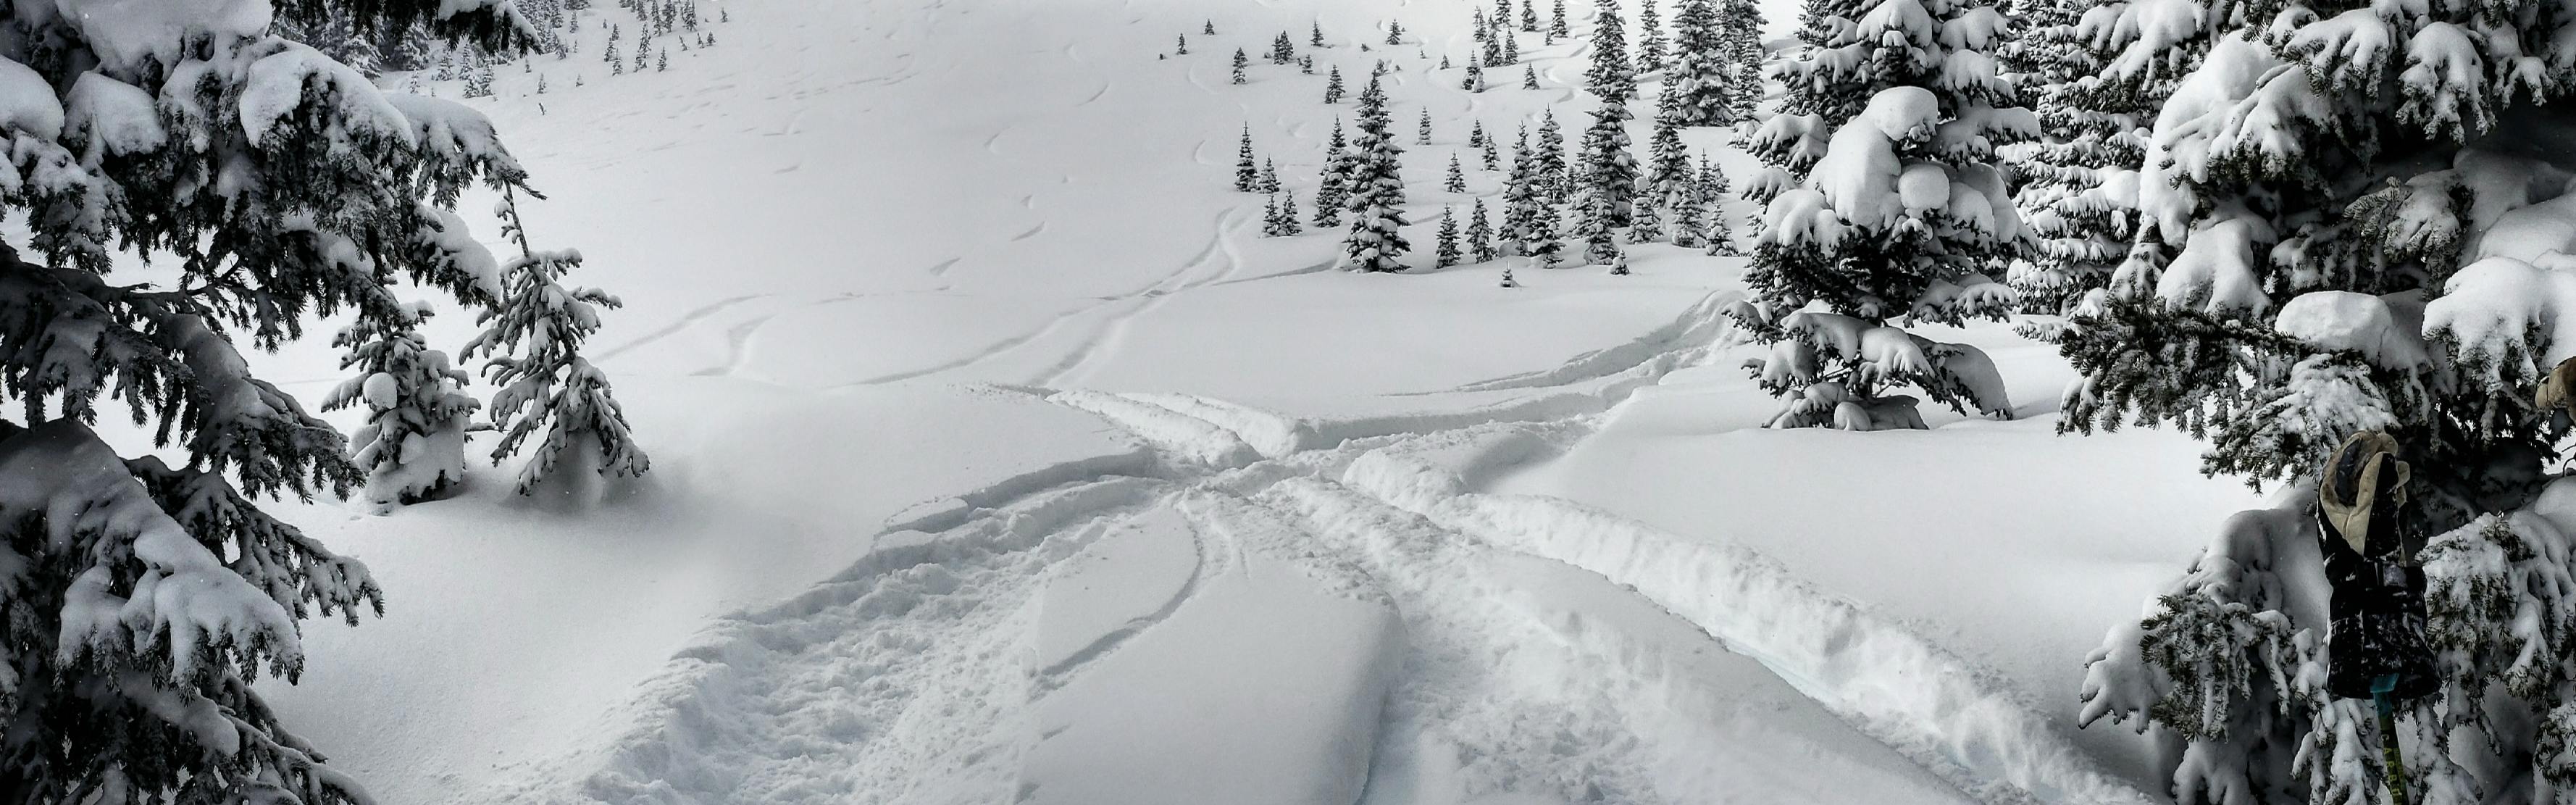 Tracks left by skiers and snowboarders through fresh powder